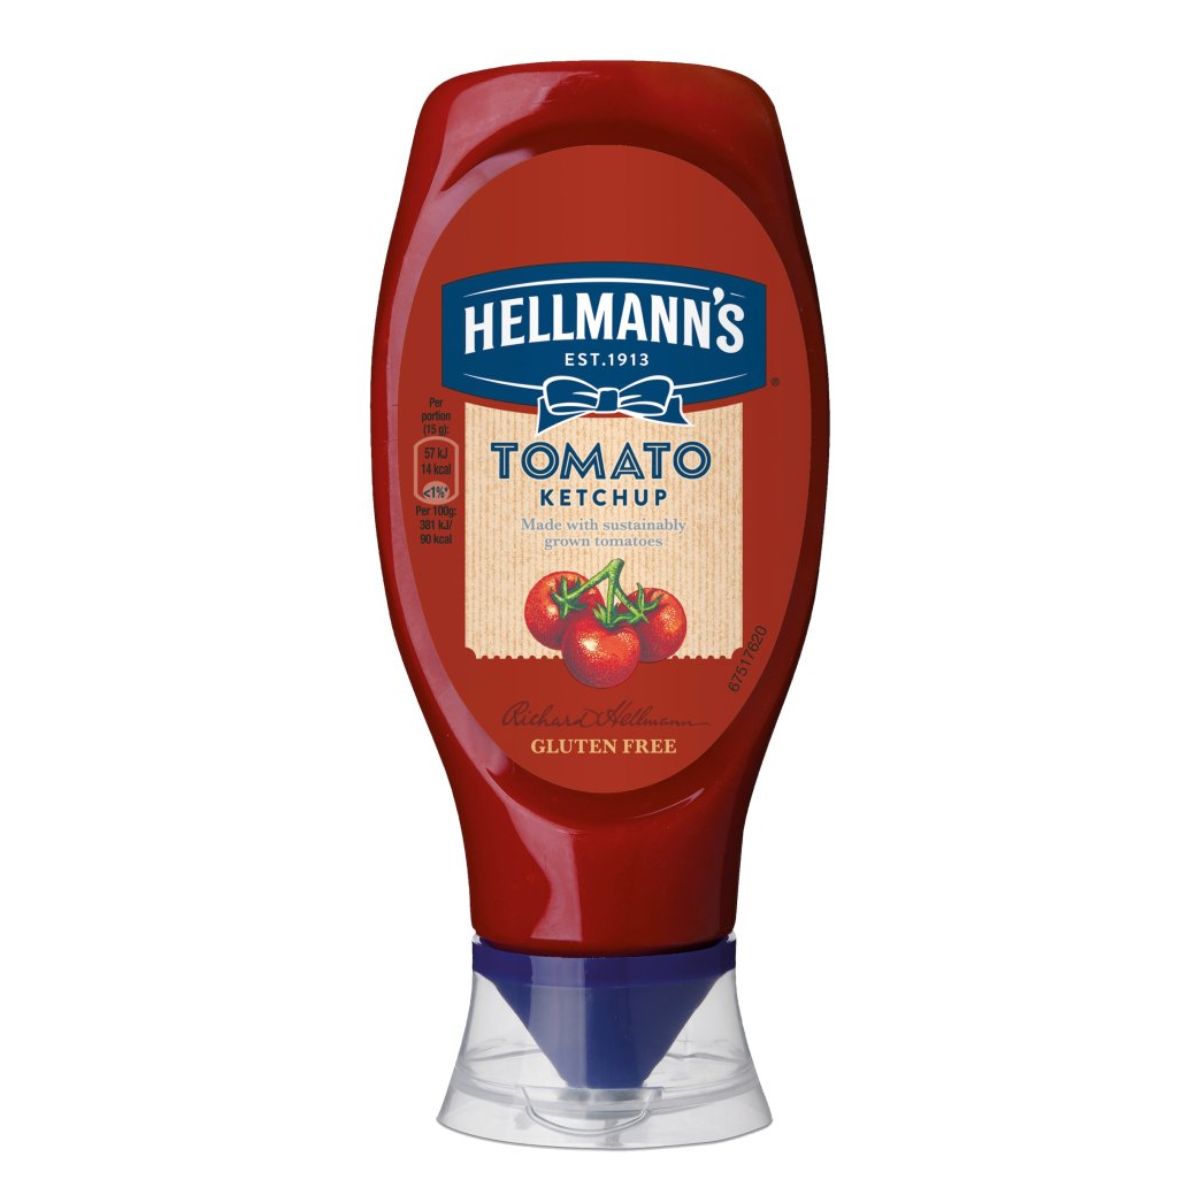 Hellmann's Tomato Ketchup Sauce on a white background.